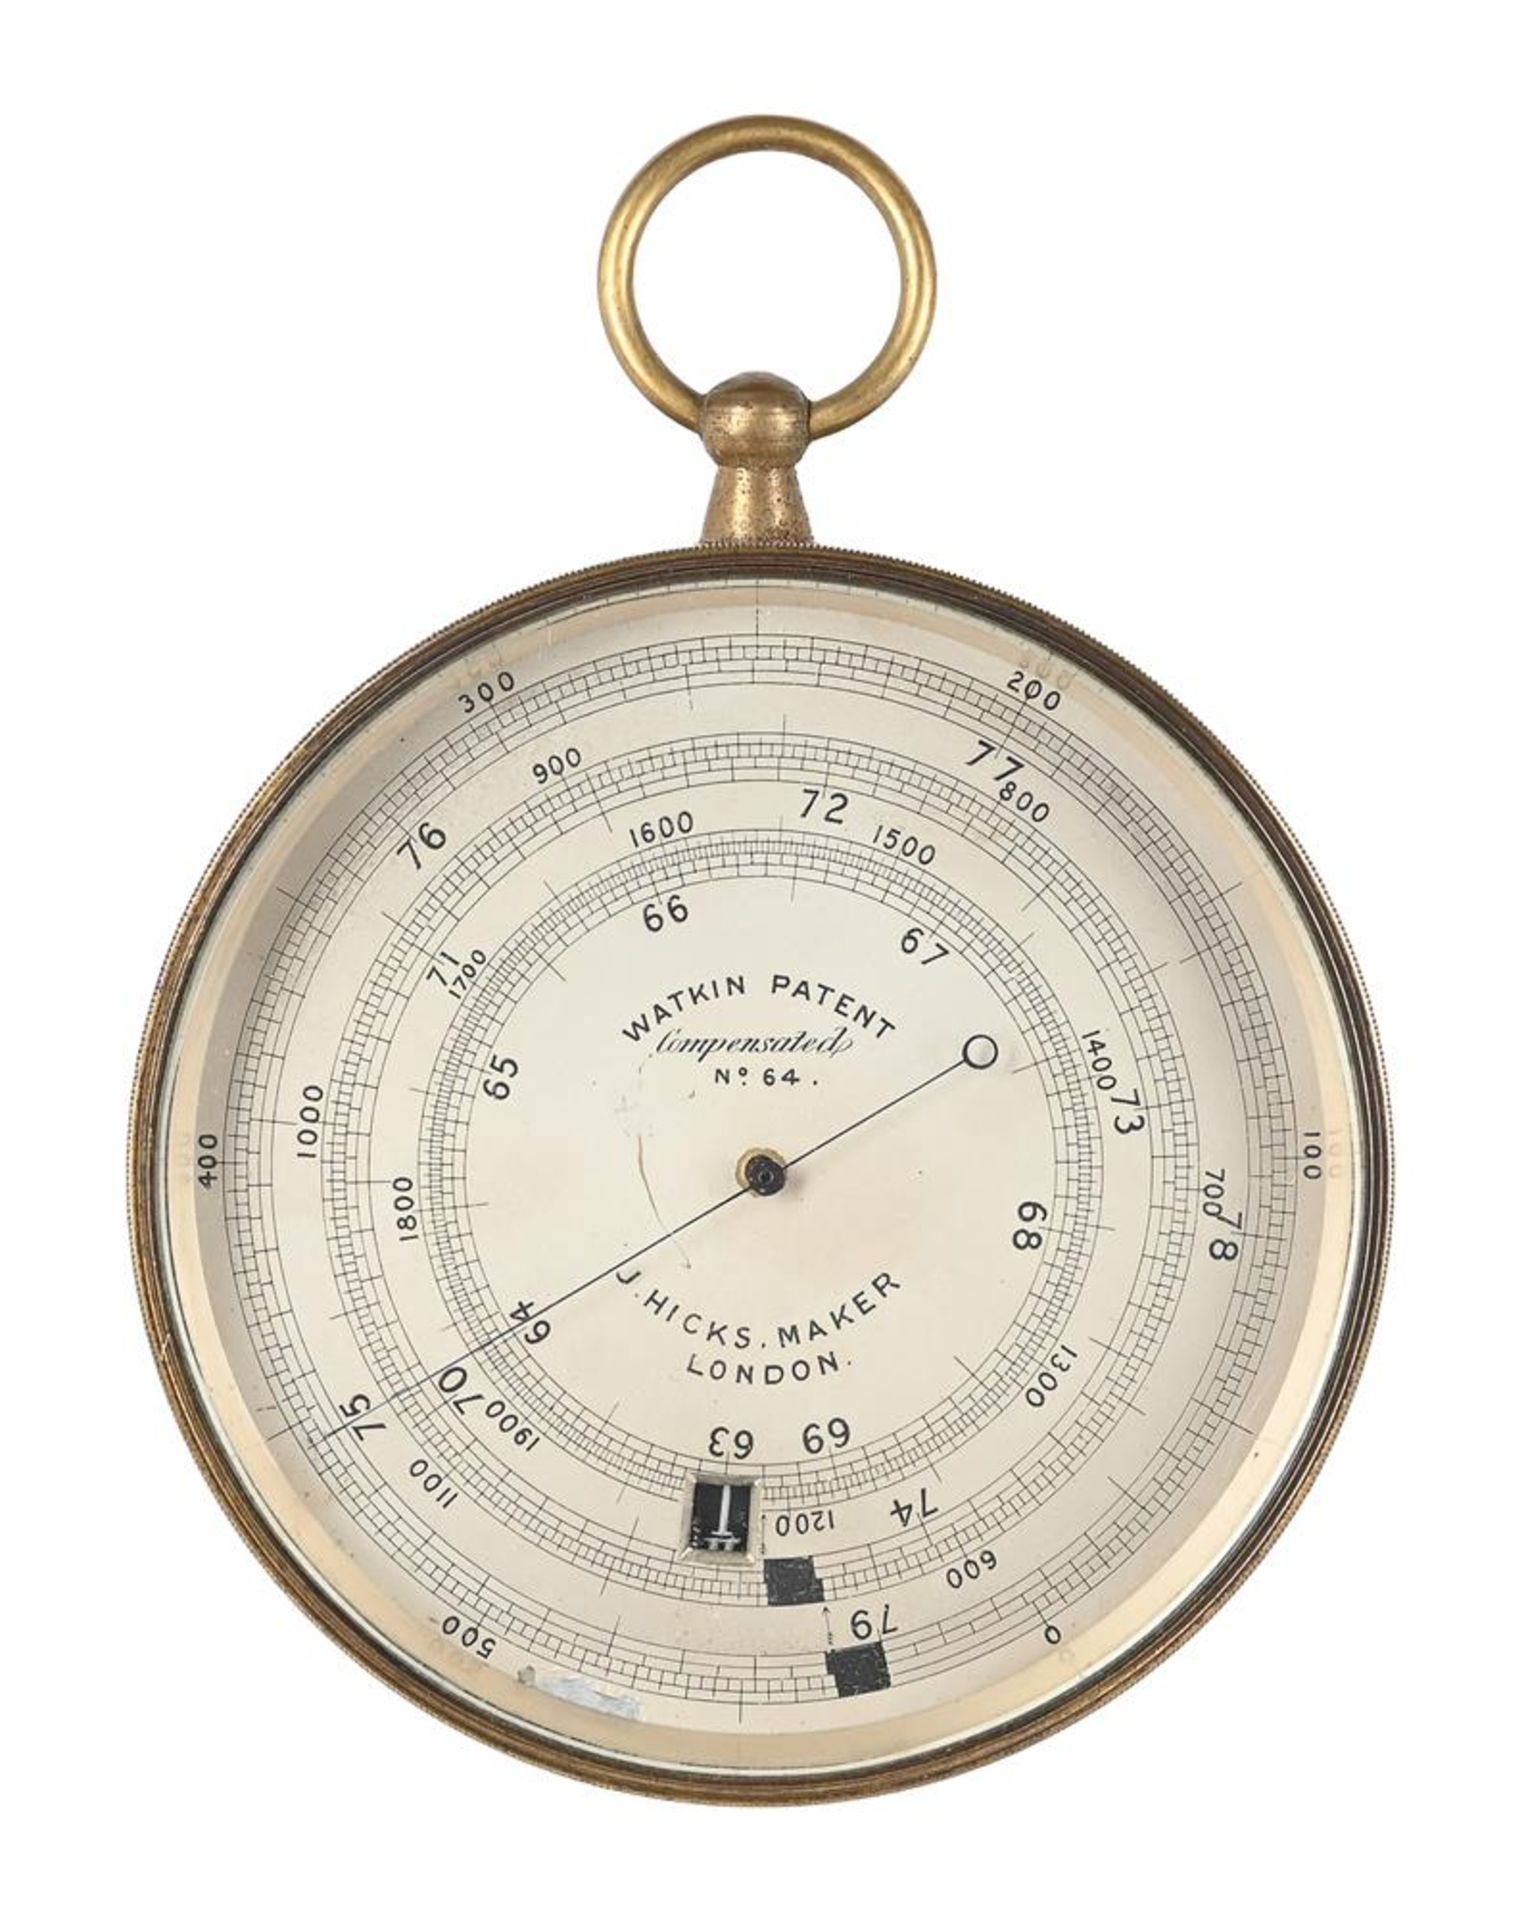 A LATE VICTORIAN WATKIN PATENT EXTENDED SCALE ANEROID SURVEYING/MINING BAROMETER - Image 2 of 3